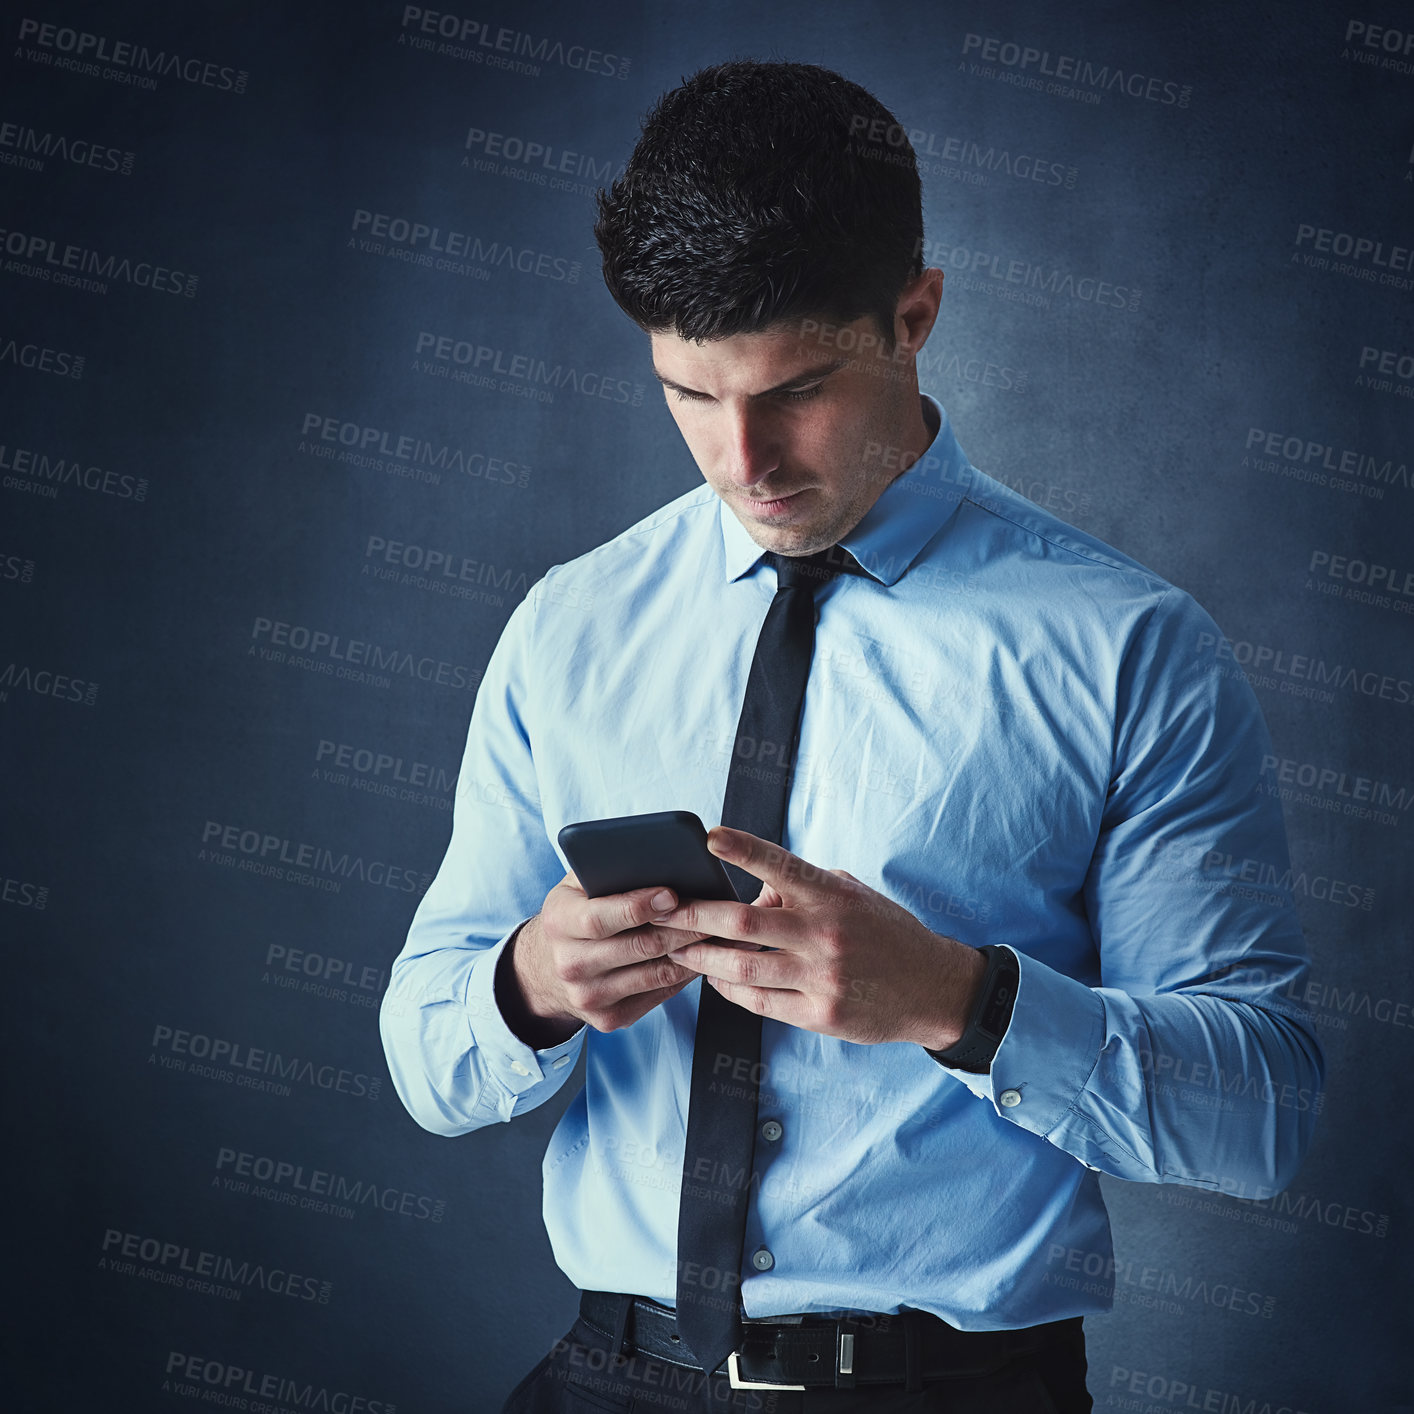 Buy stock photo Studio shot of a young businessman texting on a cellphone against a dark background